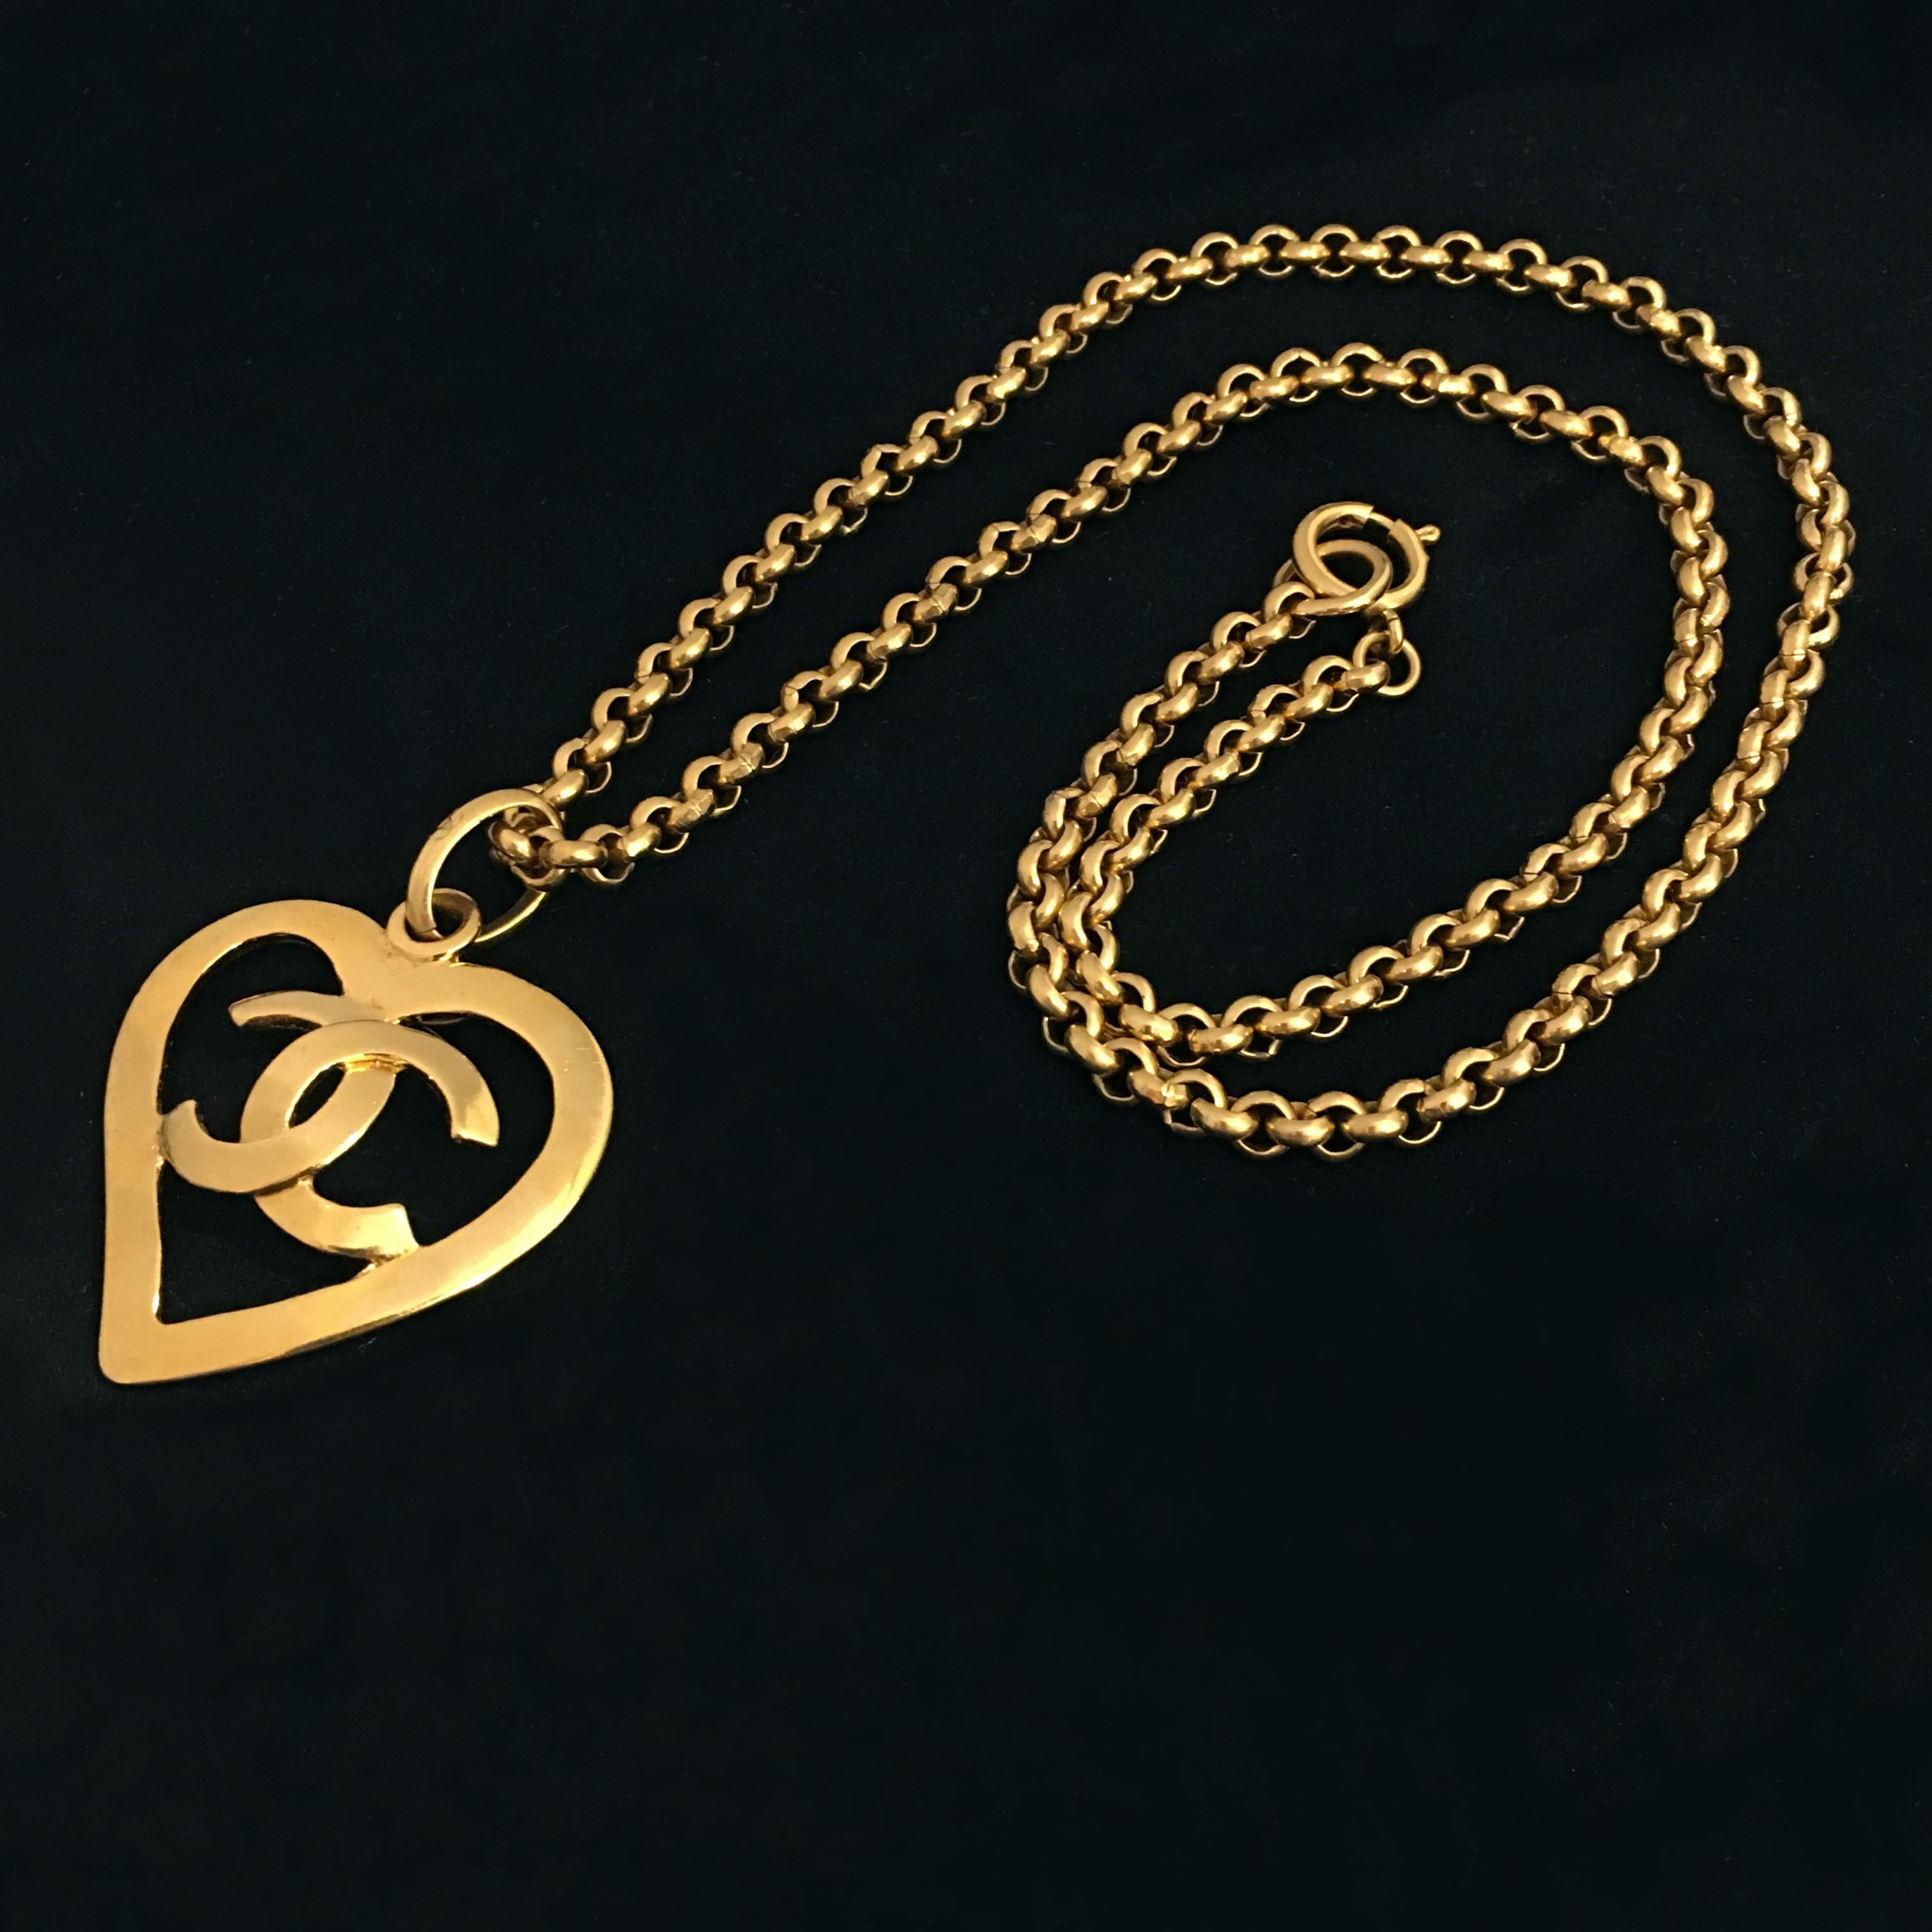 Brand: Chanel
Reference: JW365
Total Length of Necklace: 58cm
Measurement of Chanel Logo: 4x4cm
Material: Gilt Metal
Year: 1995
Made in France

Please Note: the jewelries are guarantee 100% authentic pre-owned therefore might have signs of tarnish